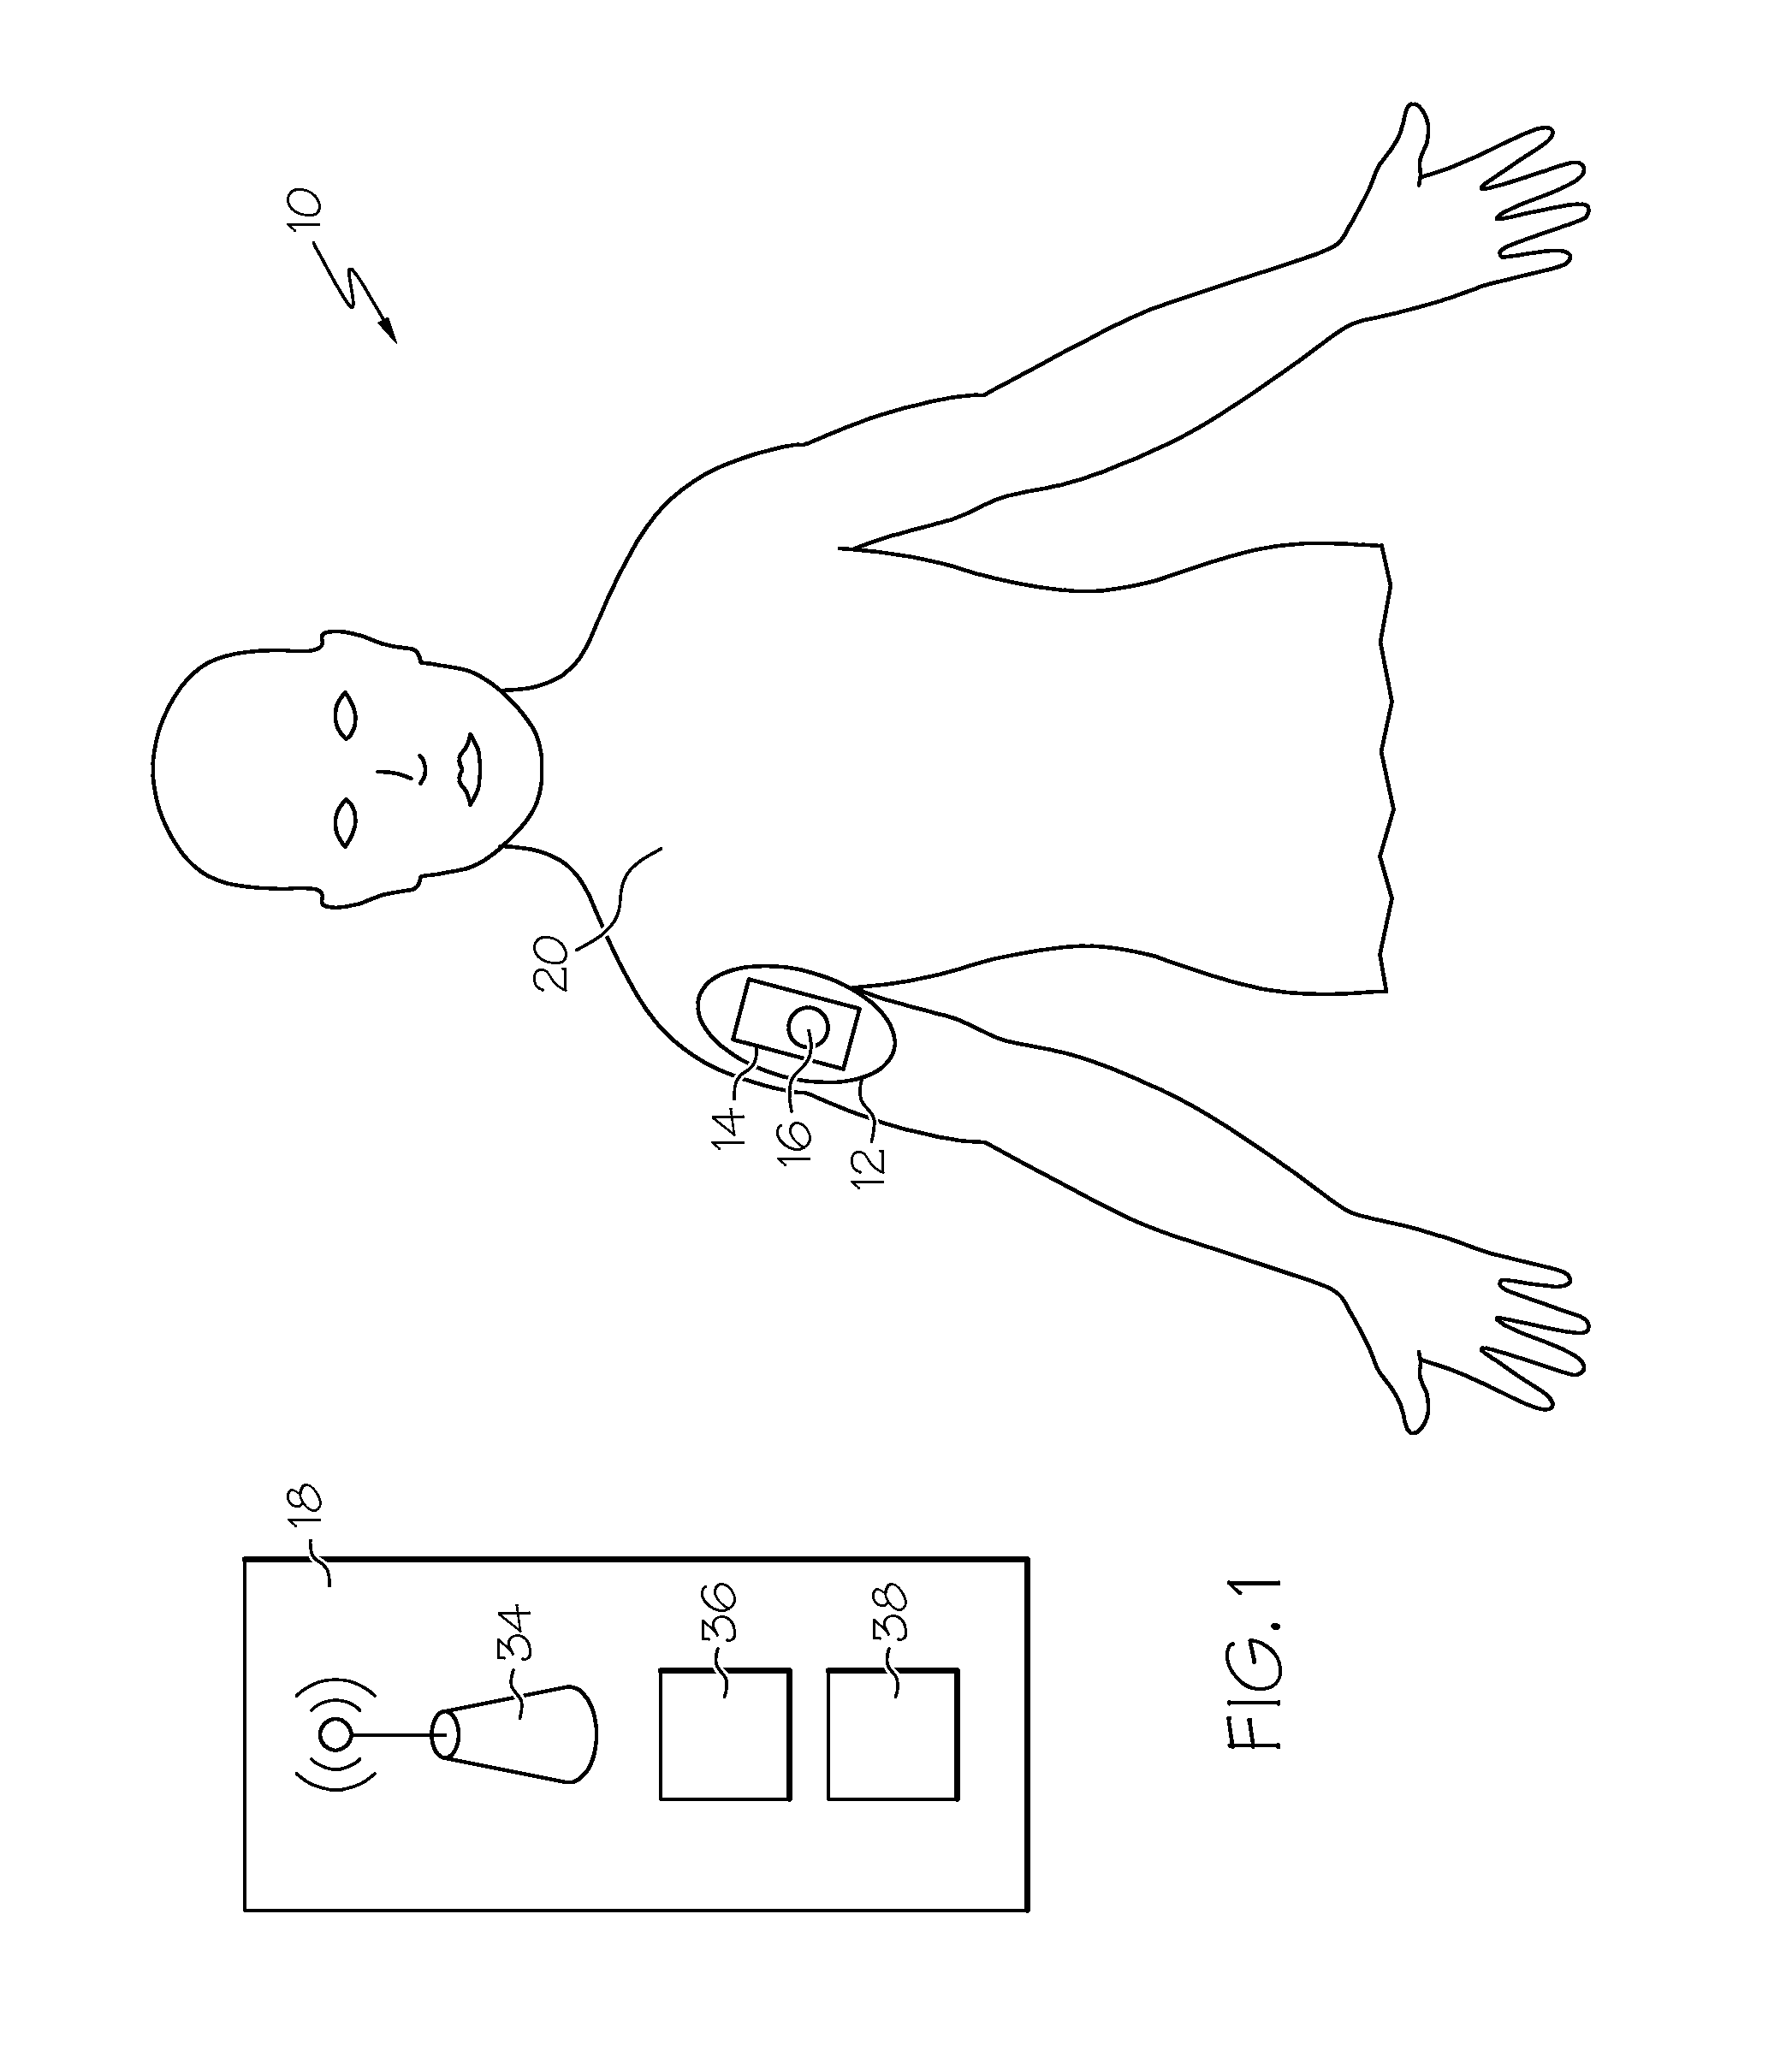 Medication regimen compliance monitoring systems and methods